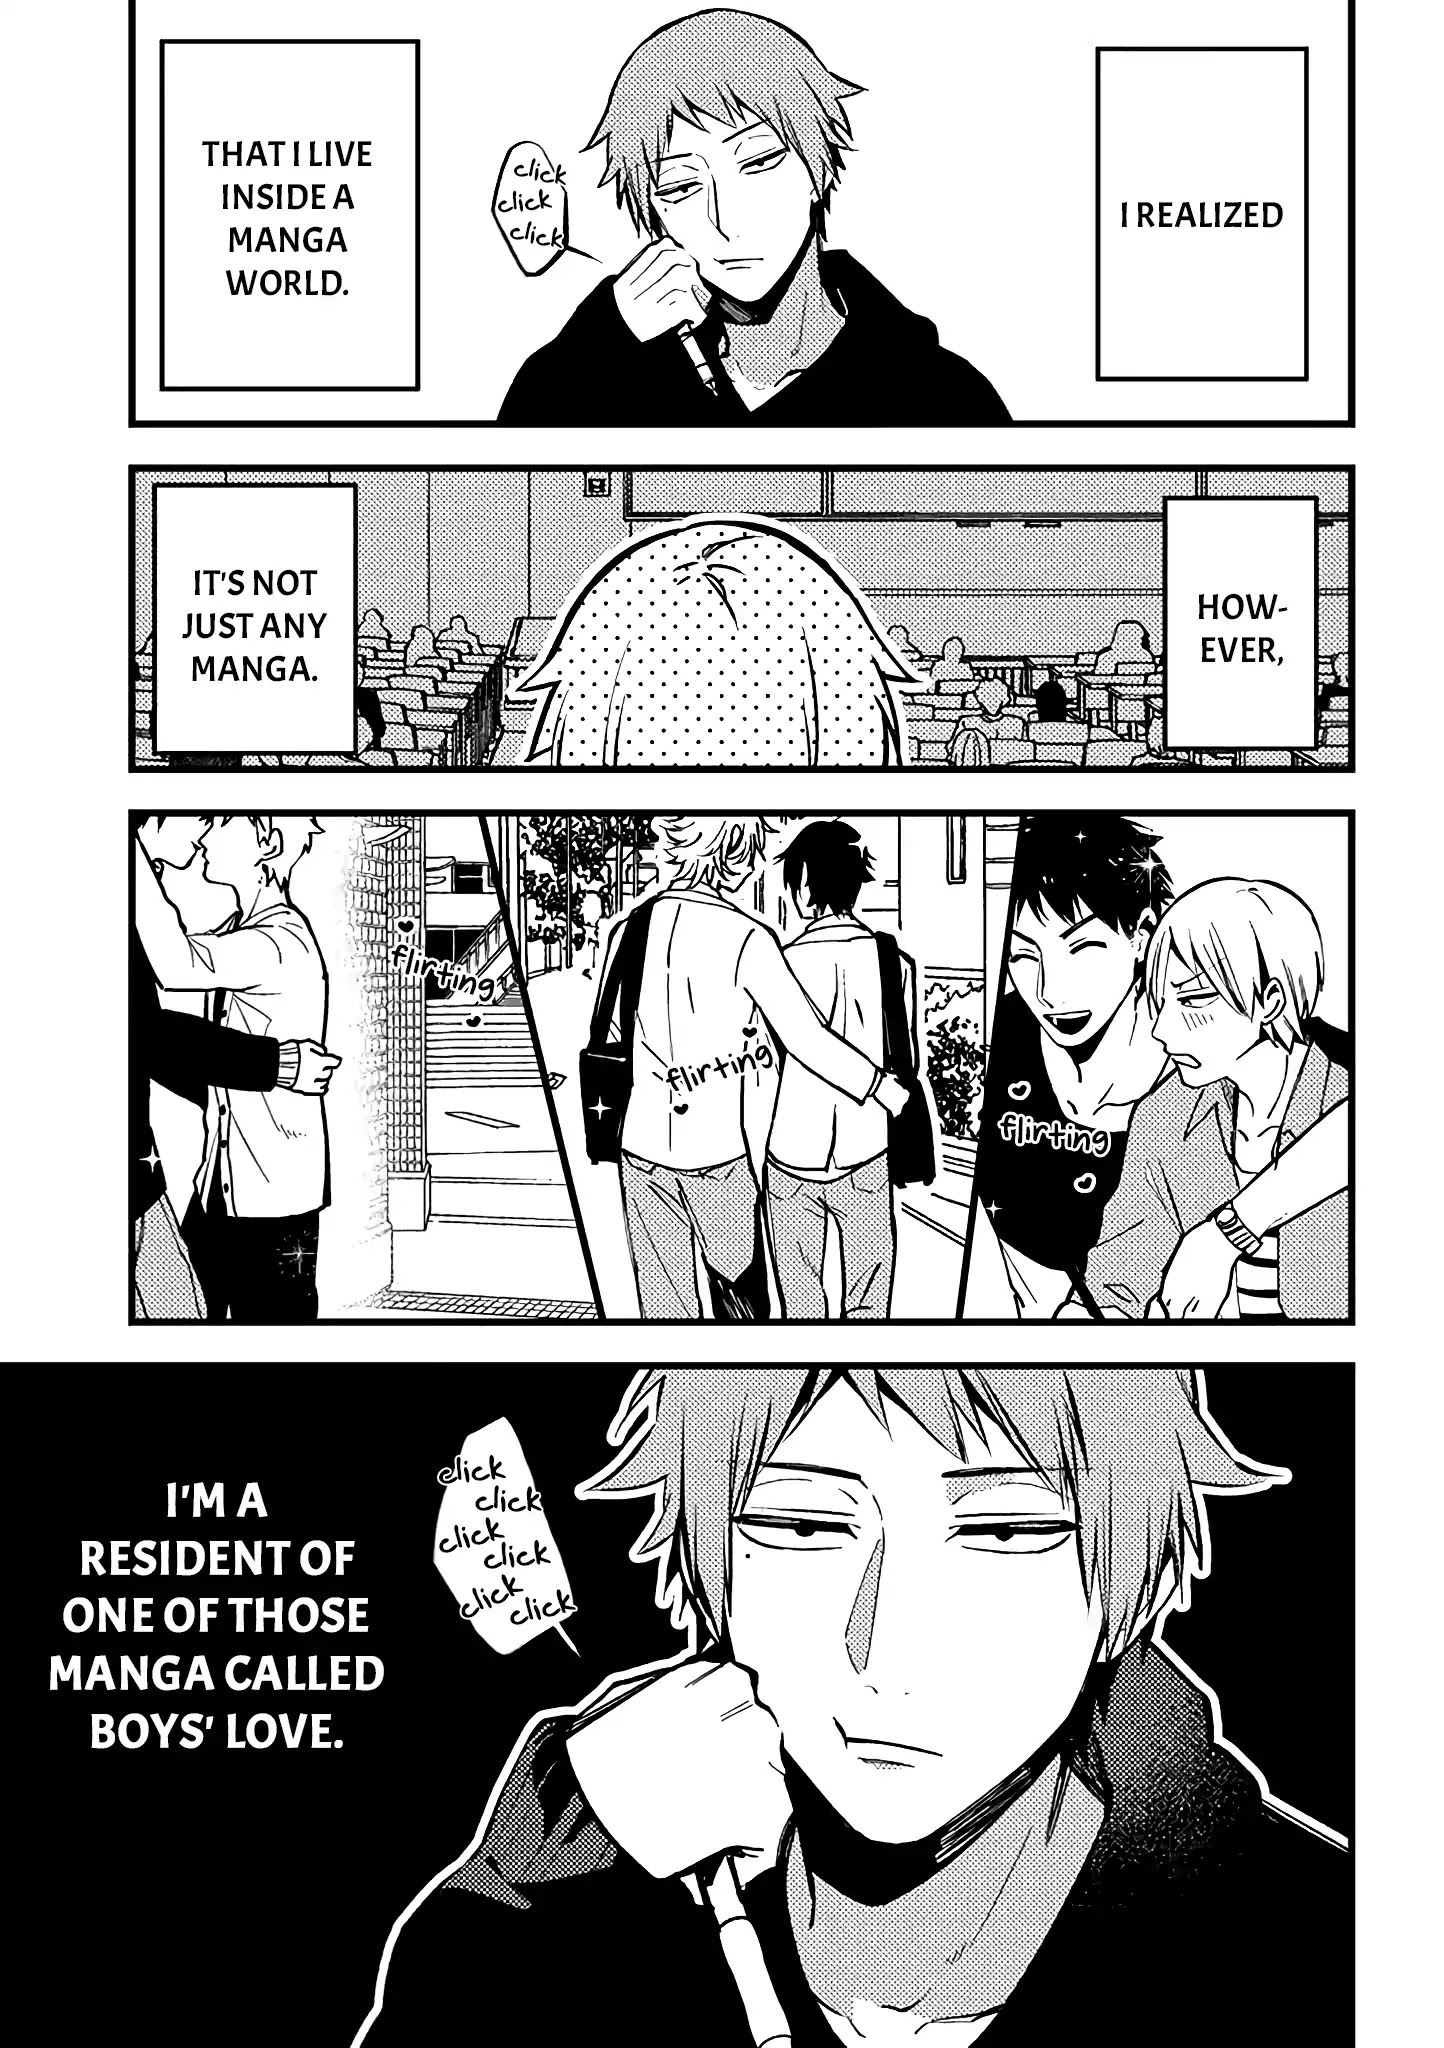 A World Where Everything Definitely Becomes Bl Vs. The Man Who Definitely Doesn't Want To Be In A Bl Chapter 1: The World In Which All Men Became Gay Vs The Man Who Won't Become Gay - Picture 2